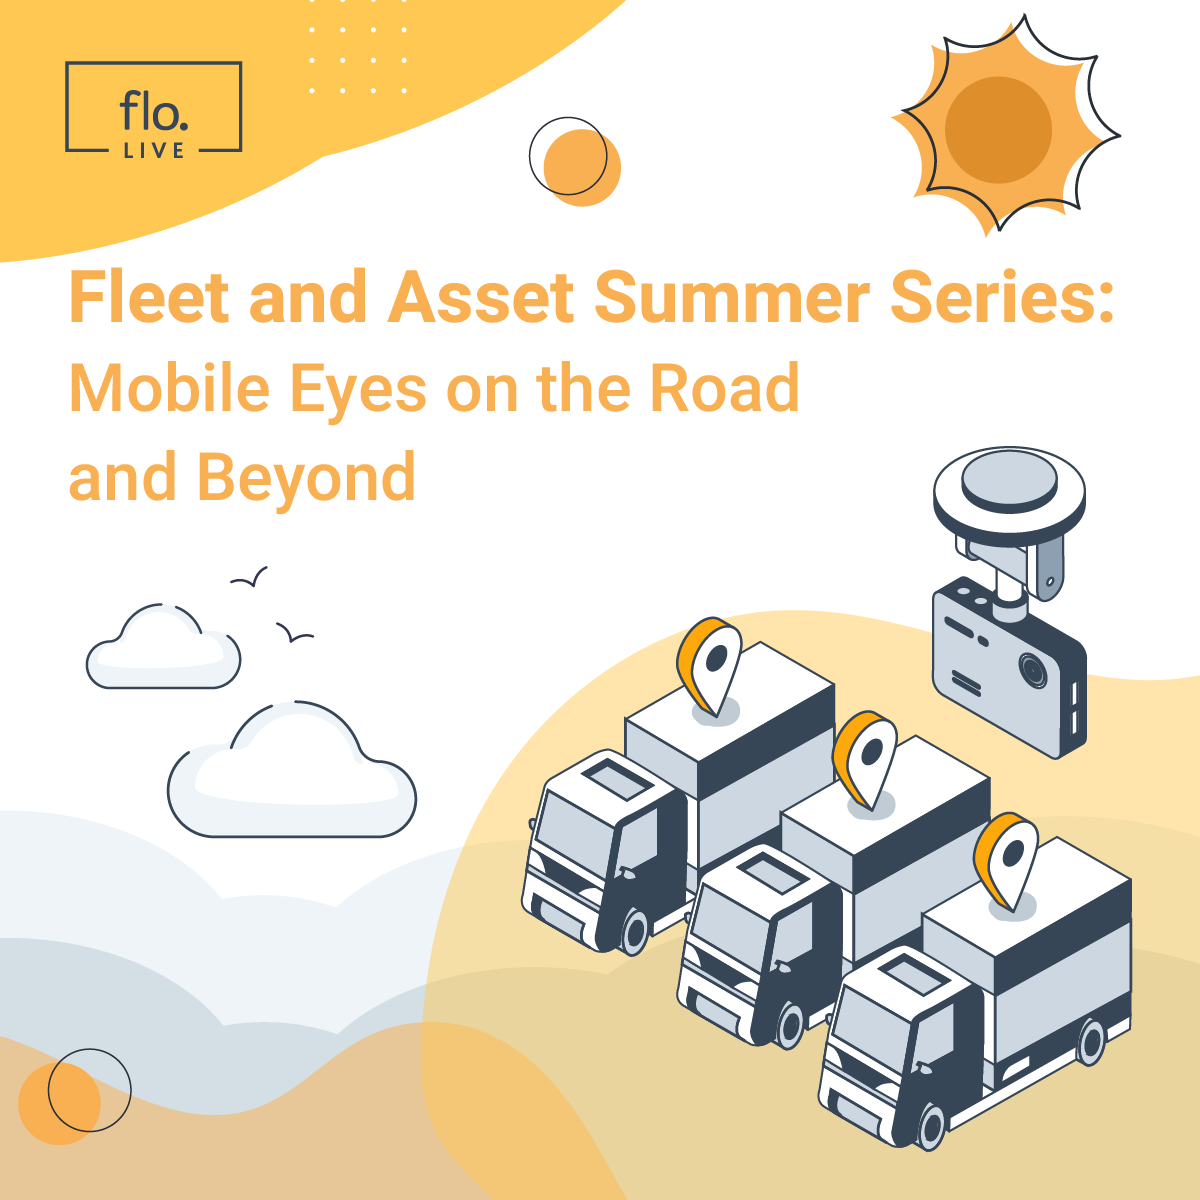 Mobile Eyes on the Road and Beyond image